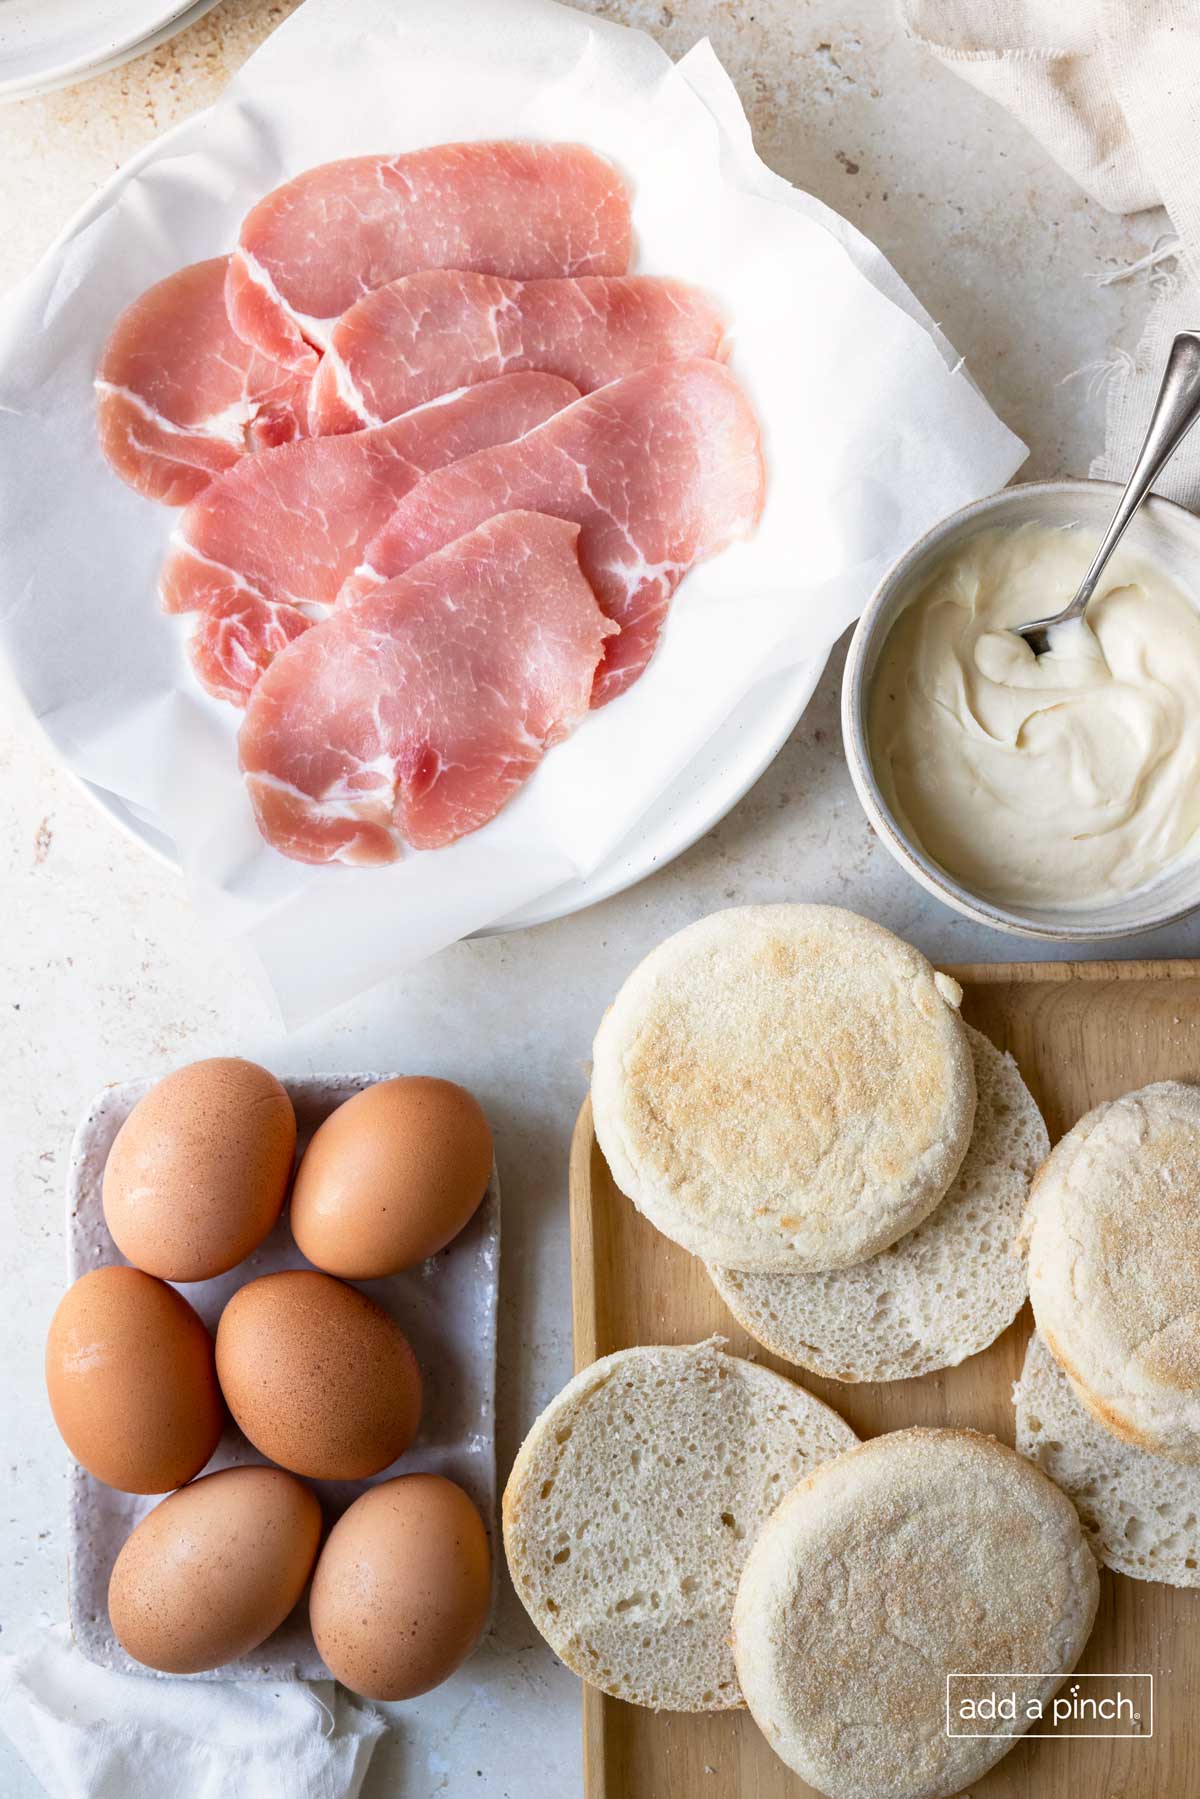 Photo of ingredients needed to make Eggs Benedict: Canadian Bacon, Eggs, English Muffins, Hollandaise Sauce.